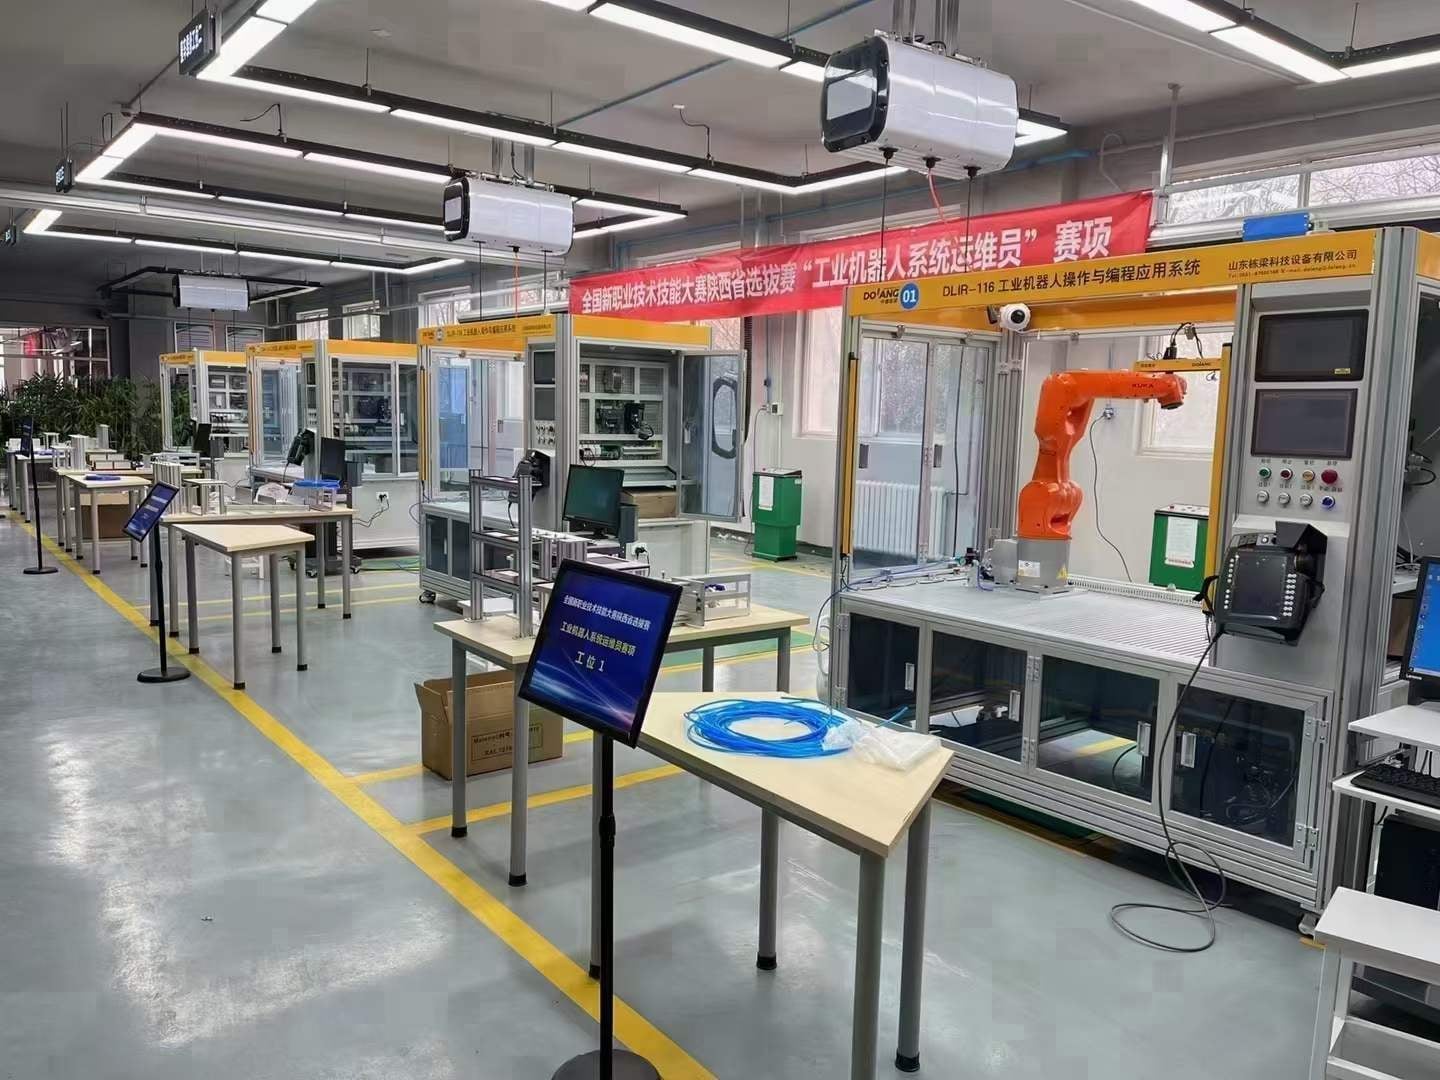 Dolang DLIR-116 contributes to the Shaanxi Provincial trial of China new vocational and technical skills competition